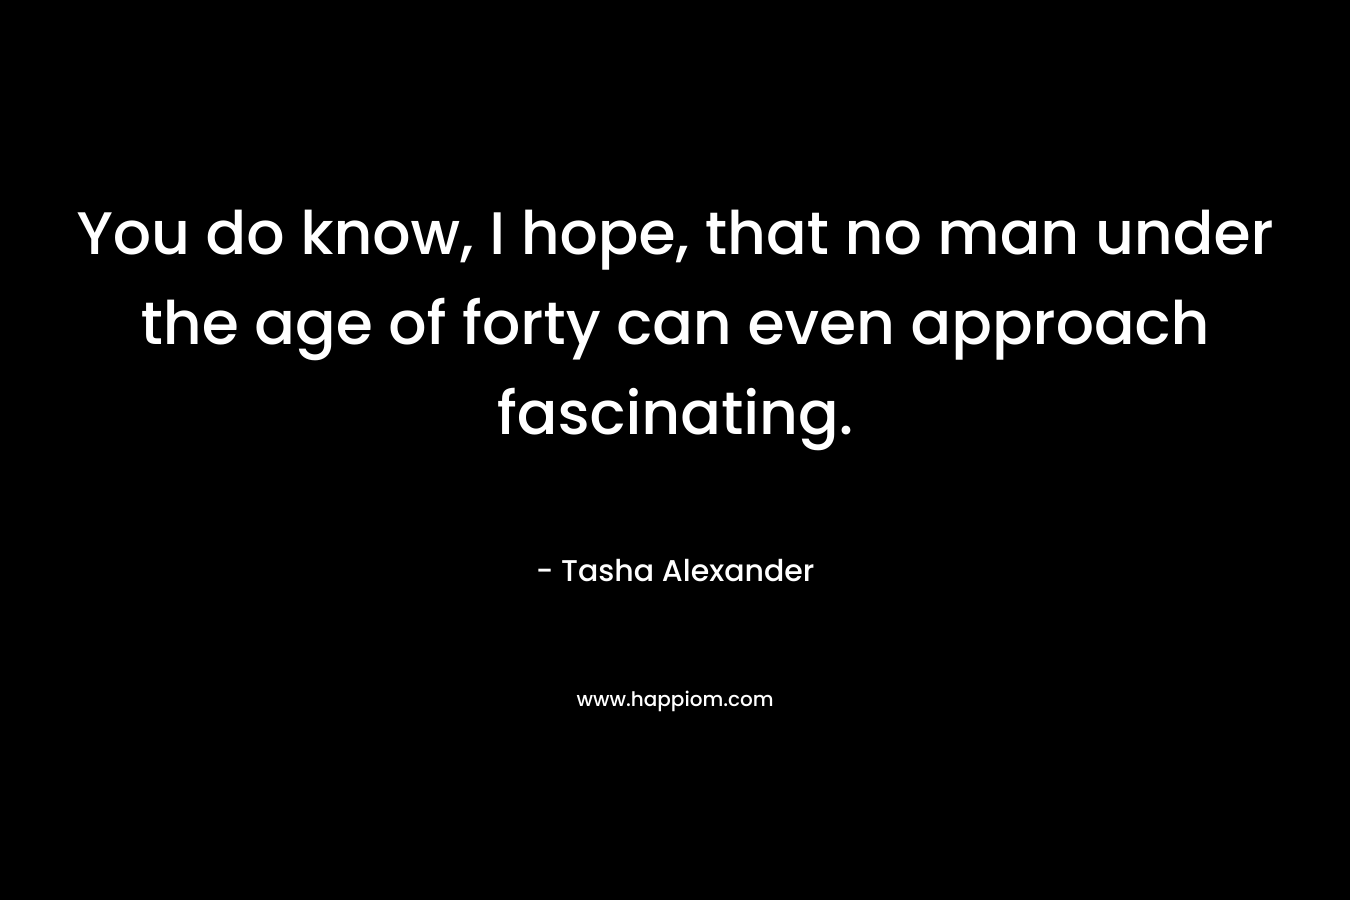 You do know, I hope, that no man under the age of forty can even approach fascinating. – Tasha Alexander